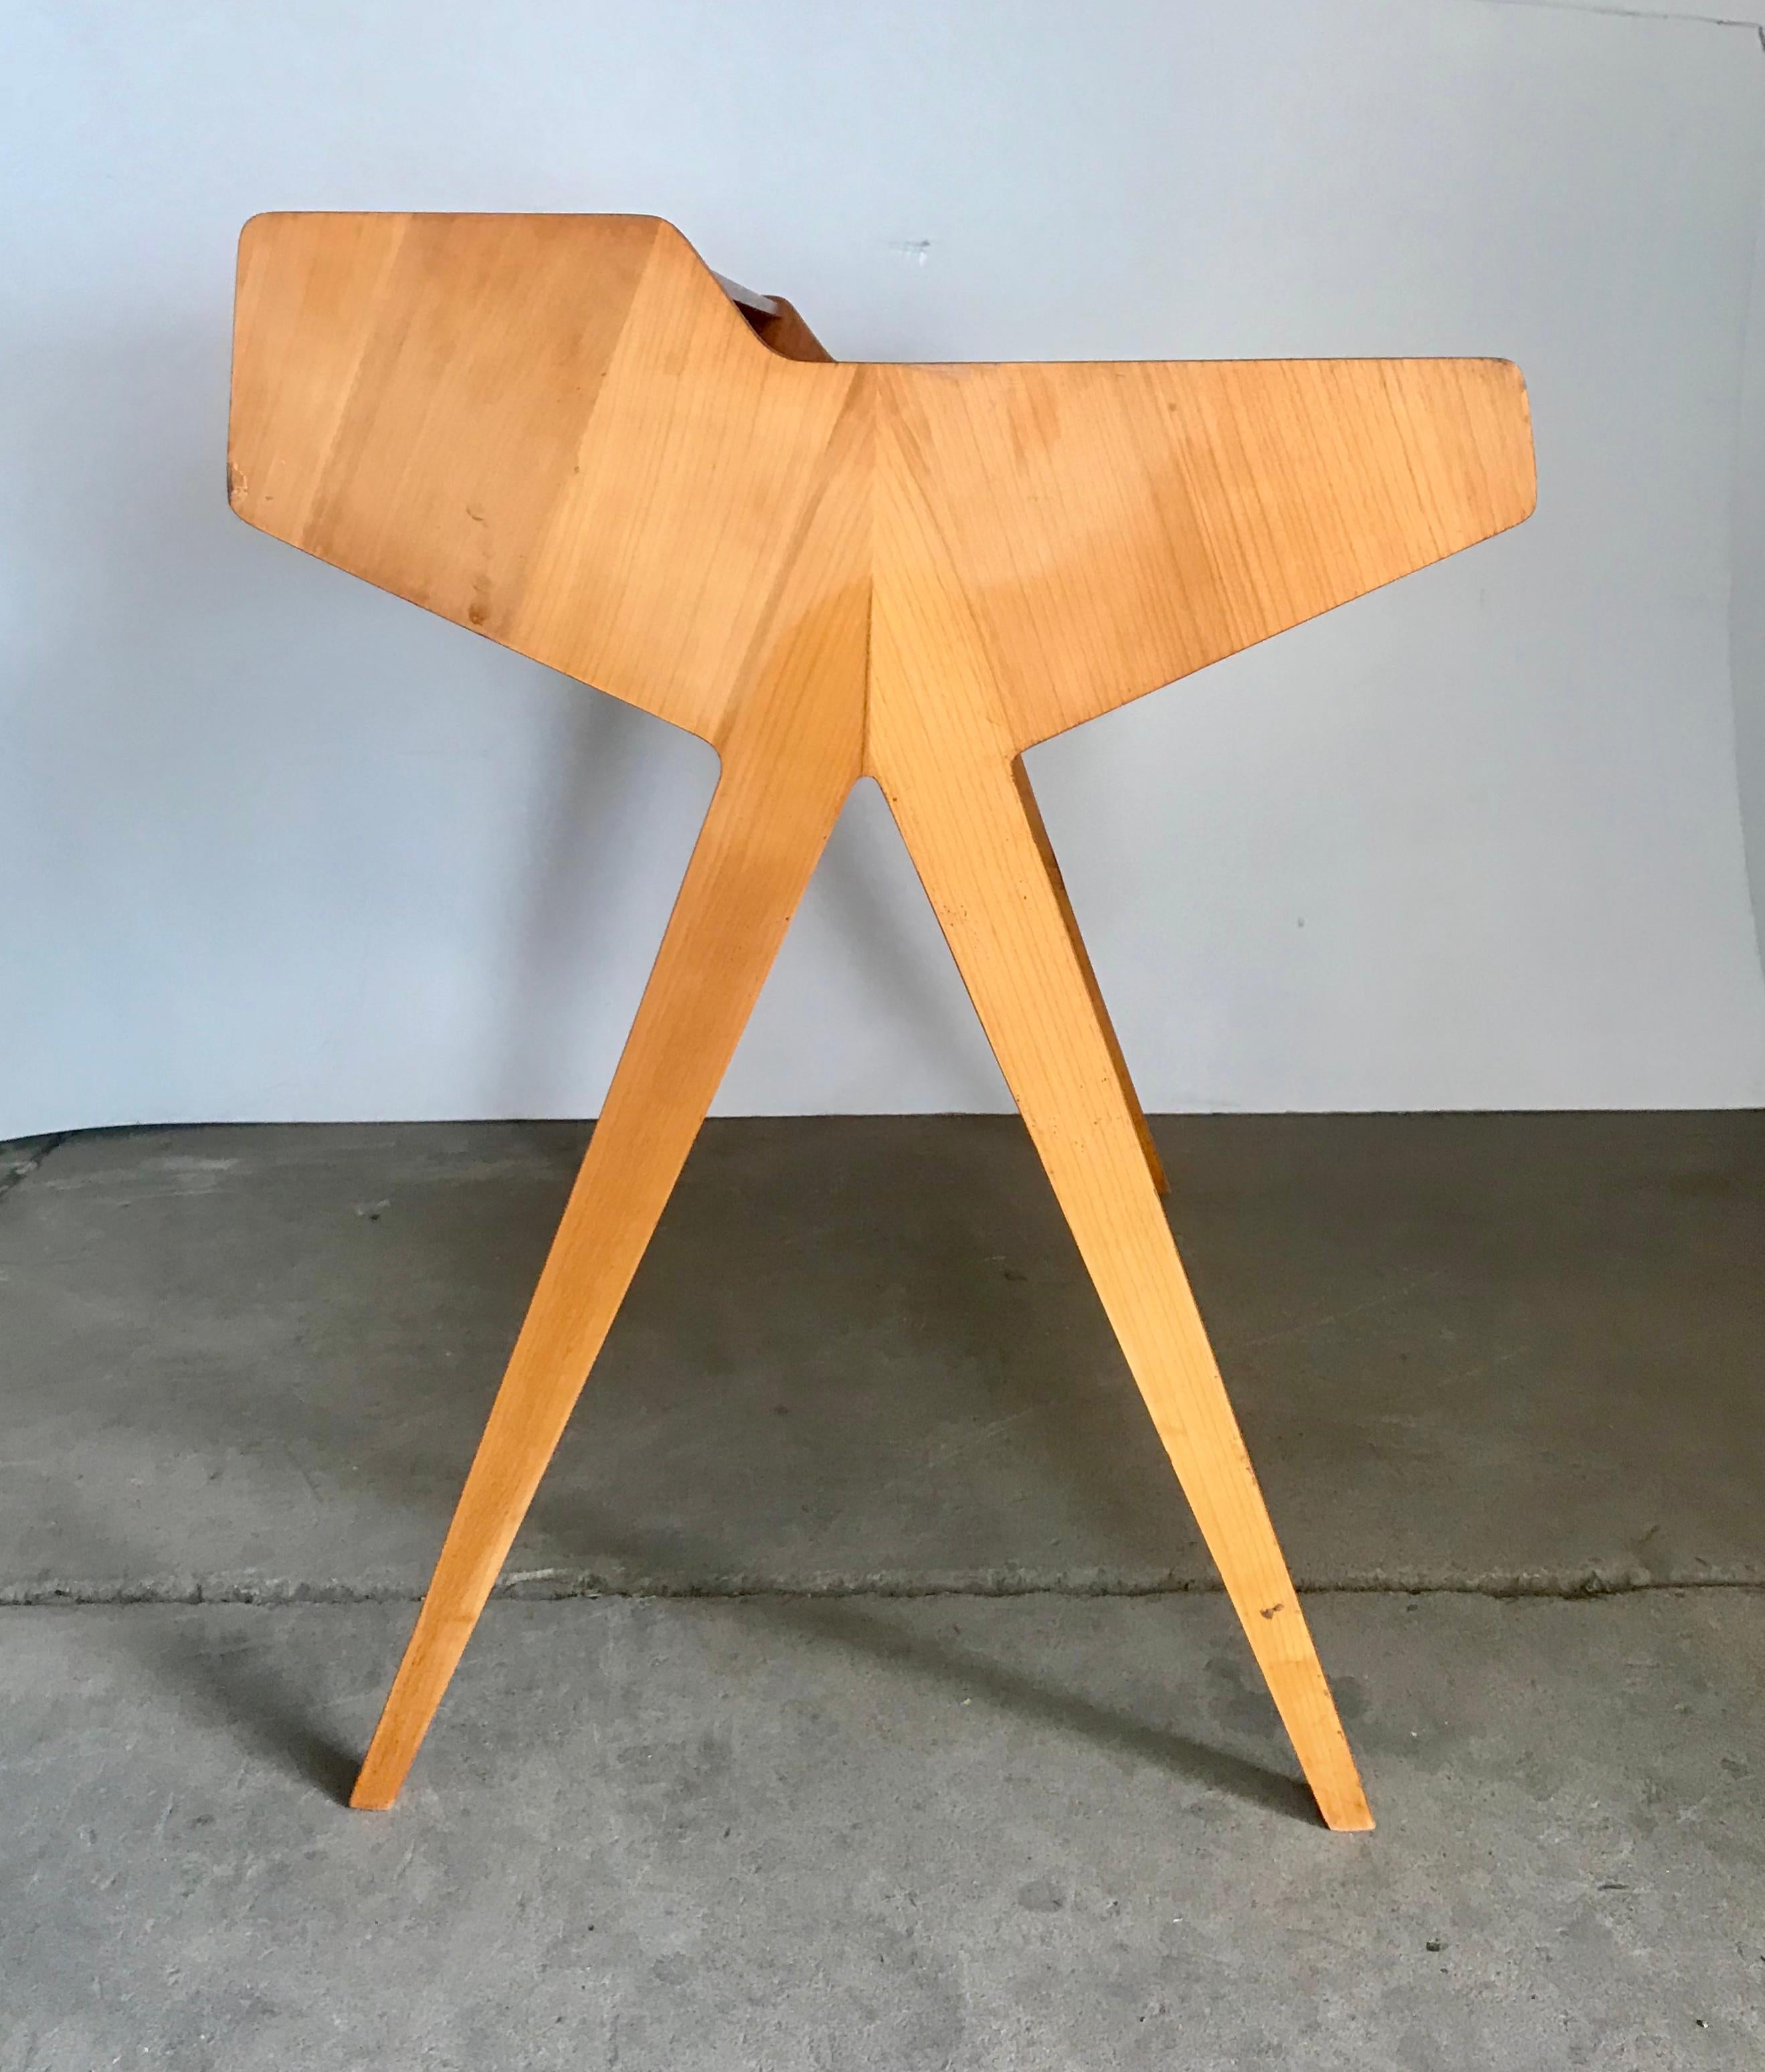 Mid-20th Century Modernist Writing Table or desk by Helmut Magg for WK Möbel Germany, 1955